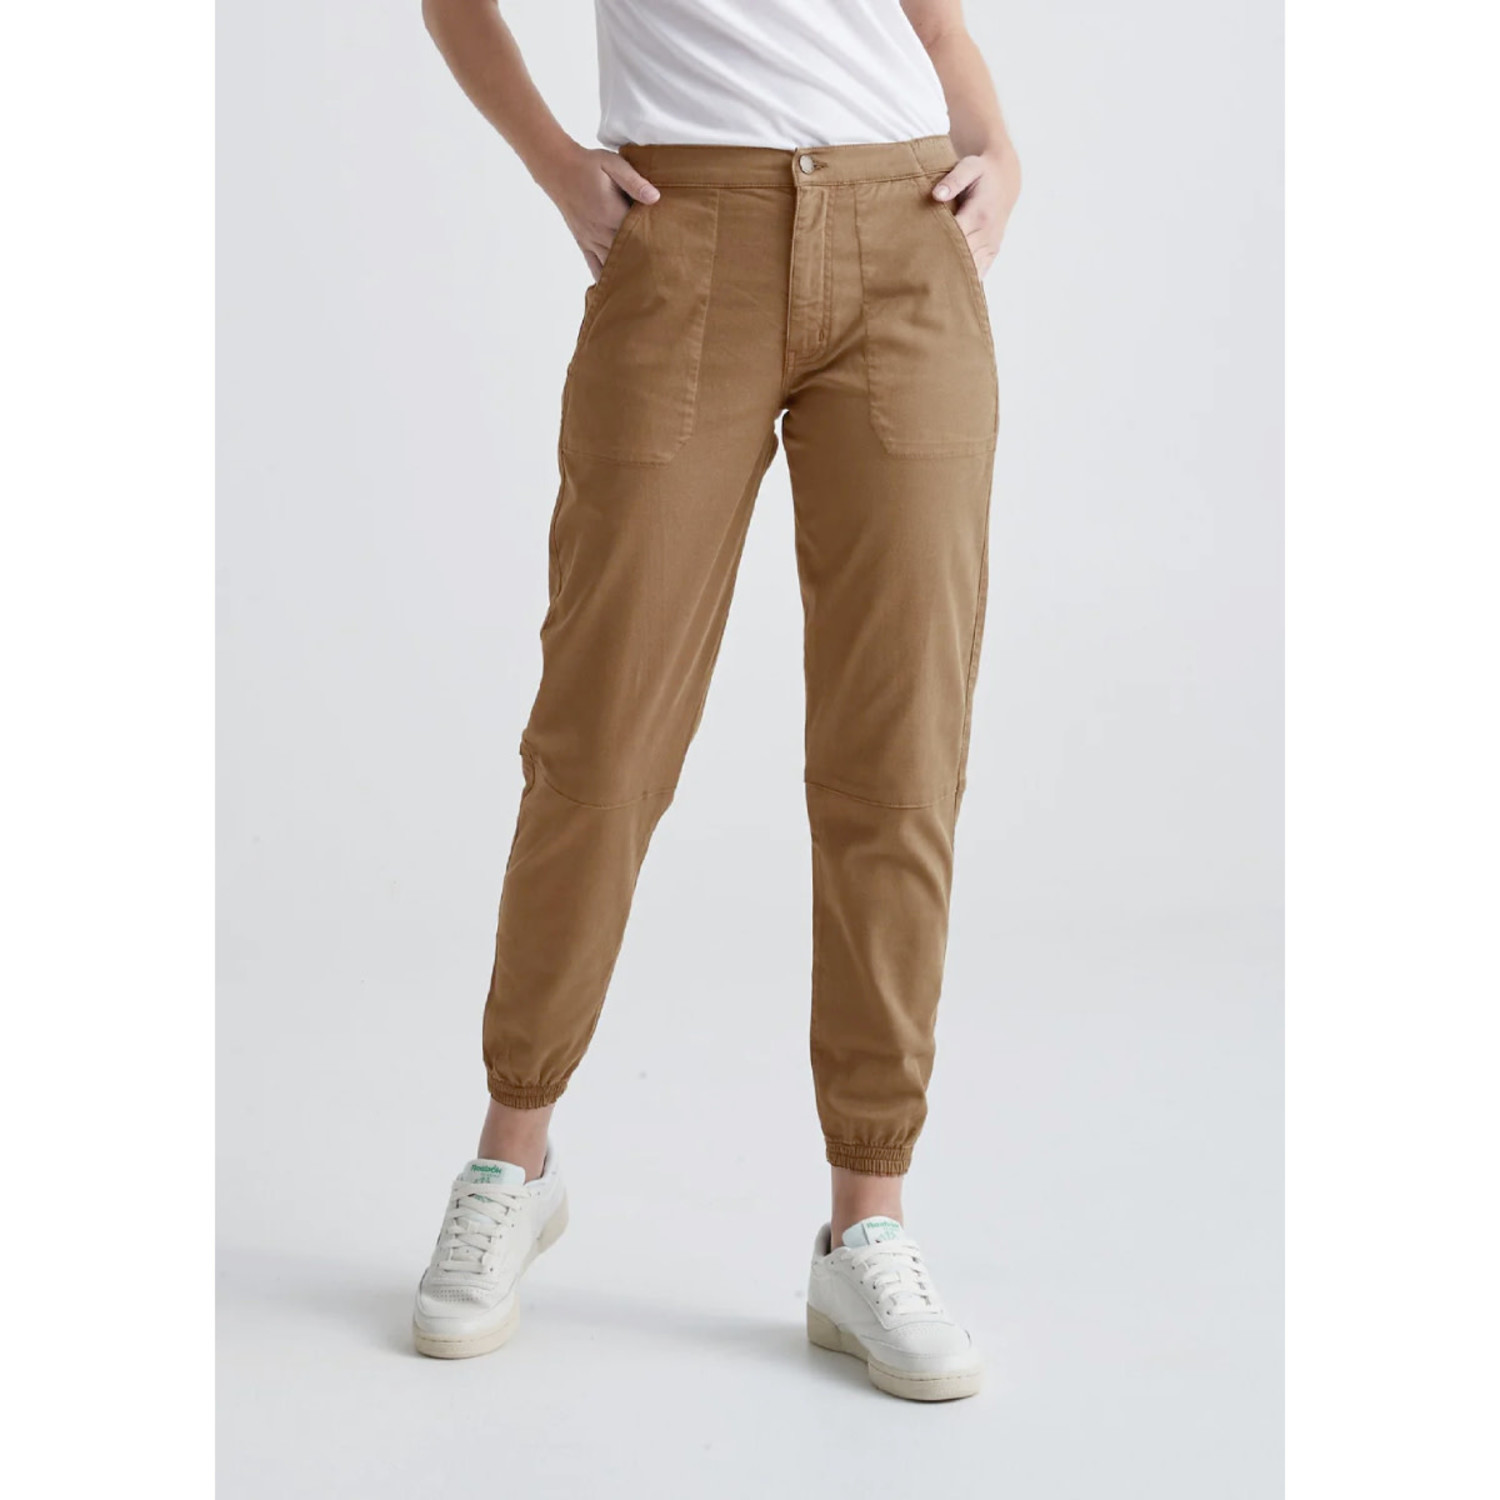 Ladies Joggers Pant With Side Pocket at Rs 949/piece